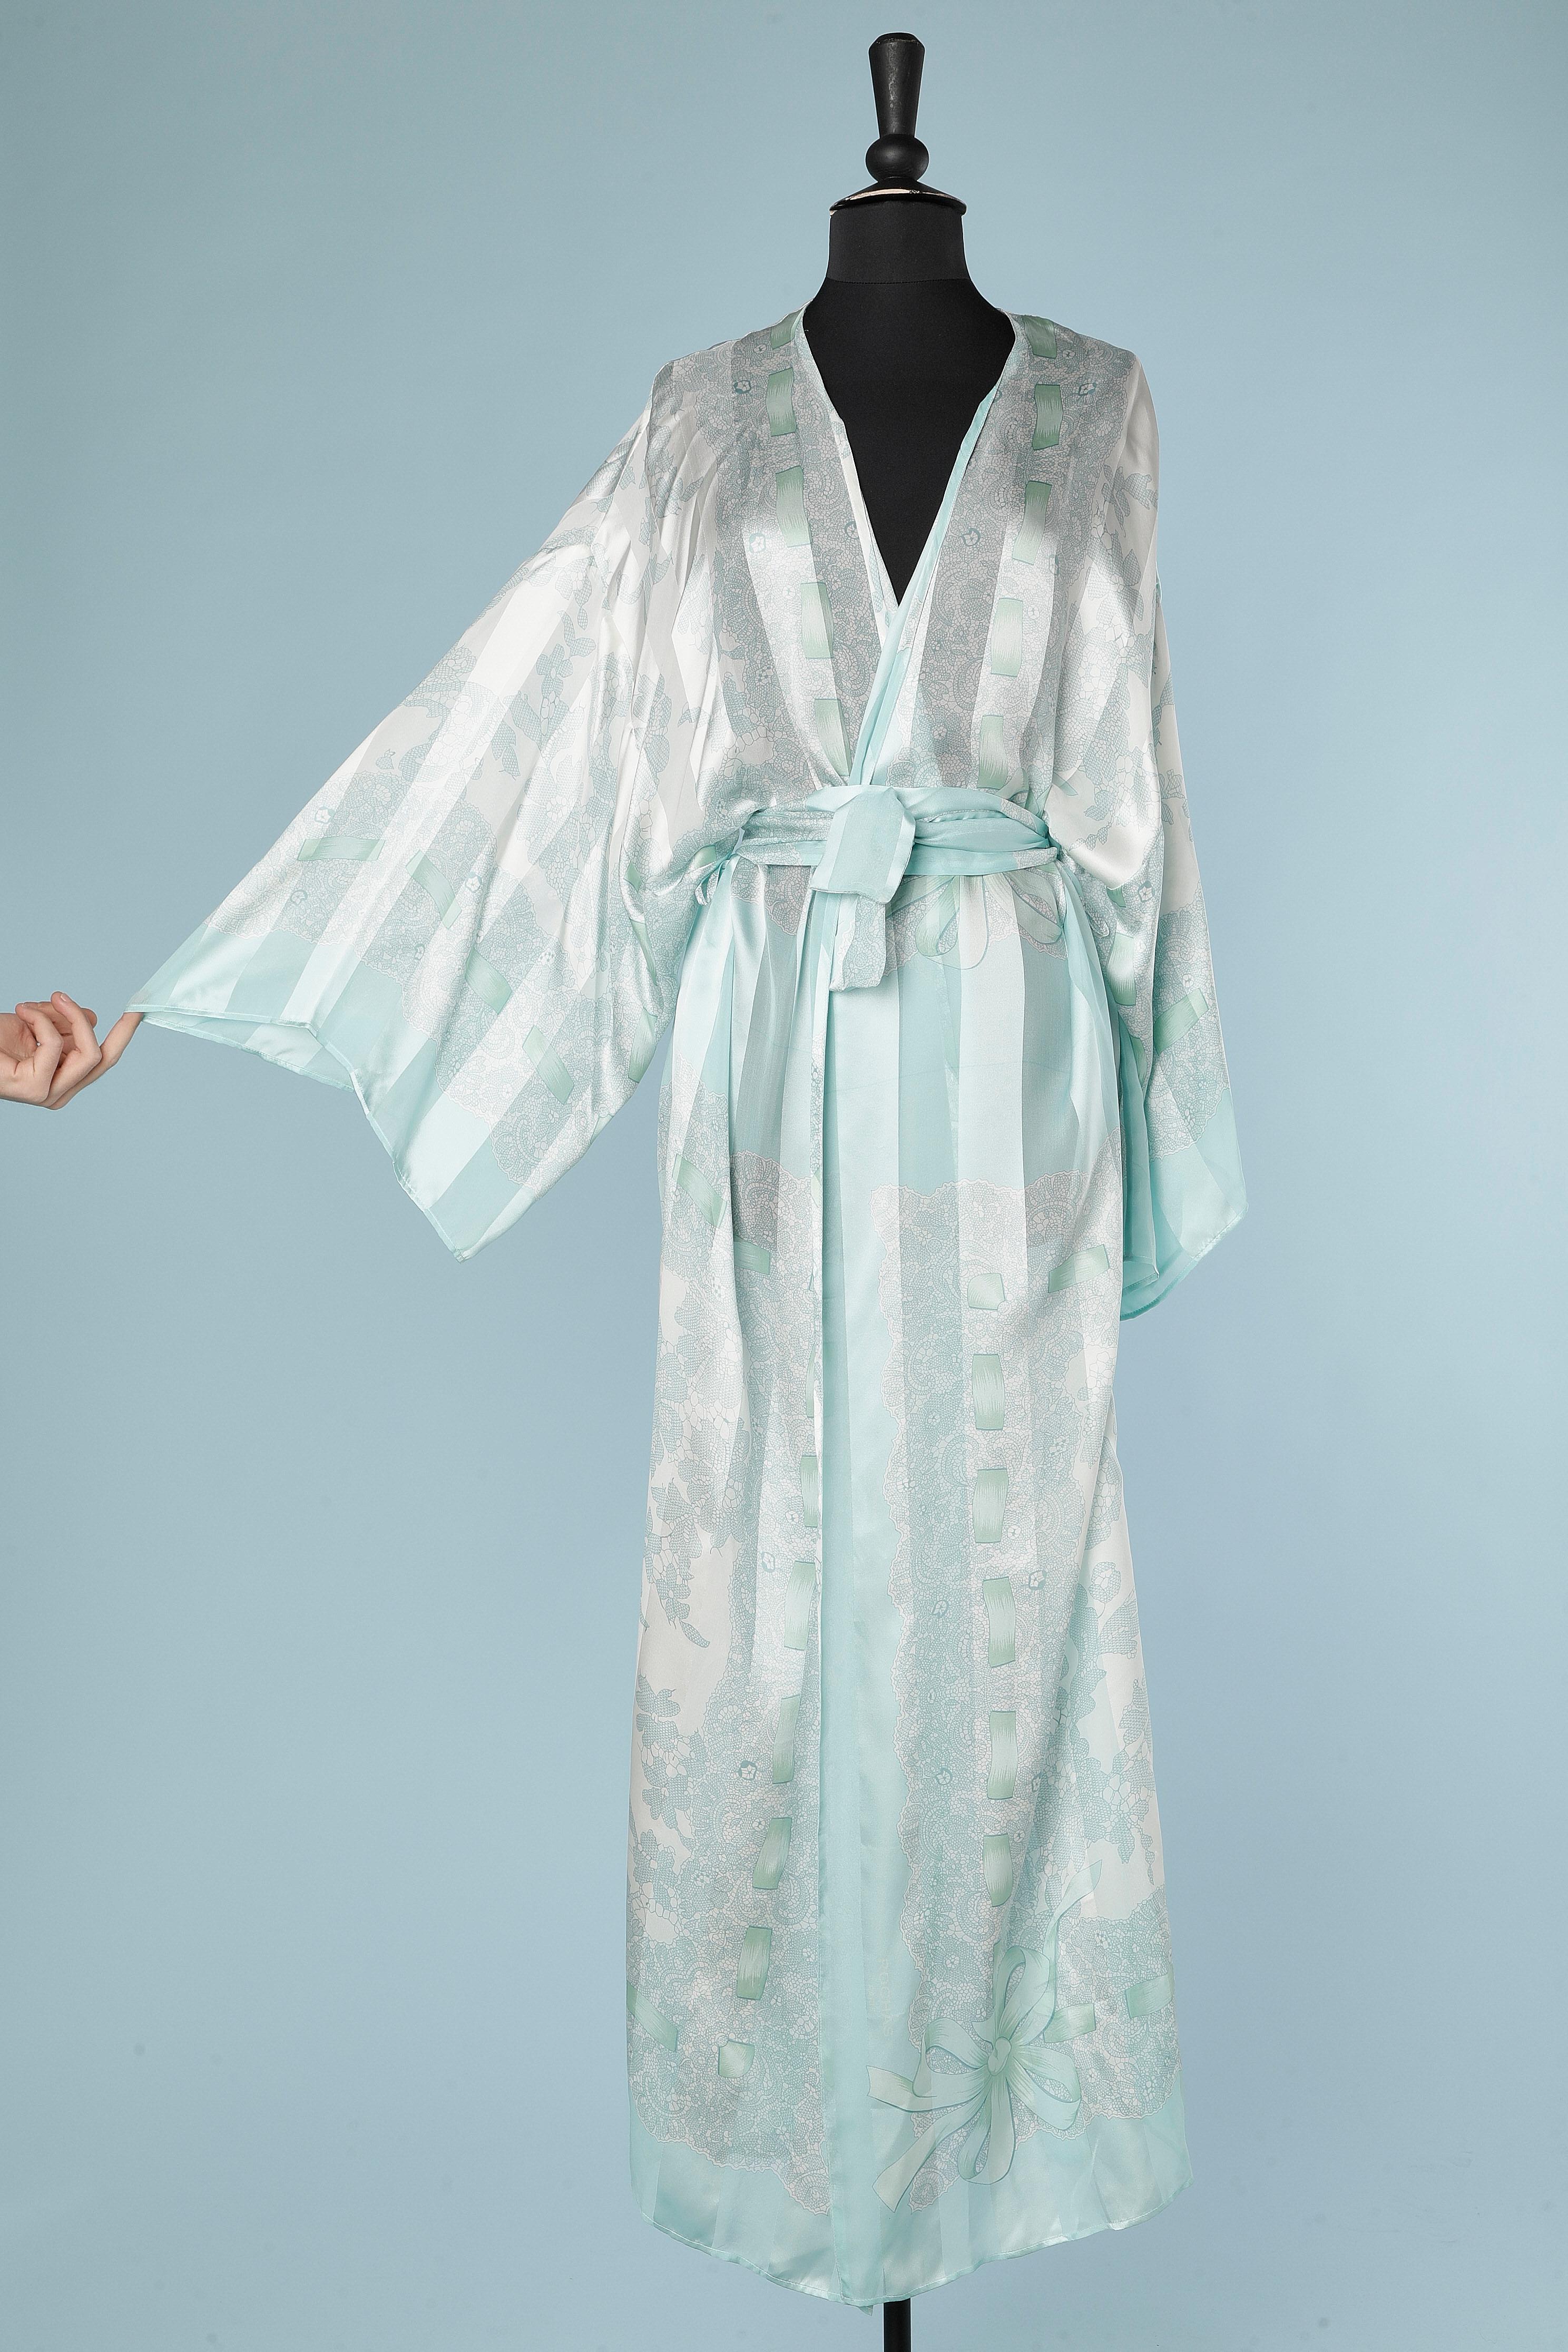 Silk printed jacquard chiffon silk Robe with belt and beltloop. 
New with tag.
SIZE 44( Fr) XL 